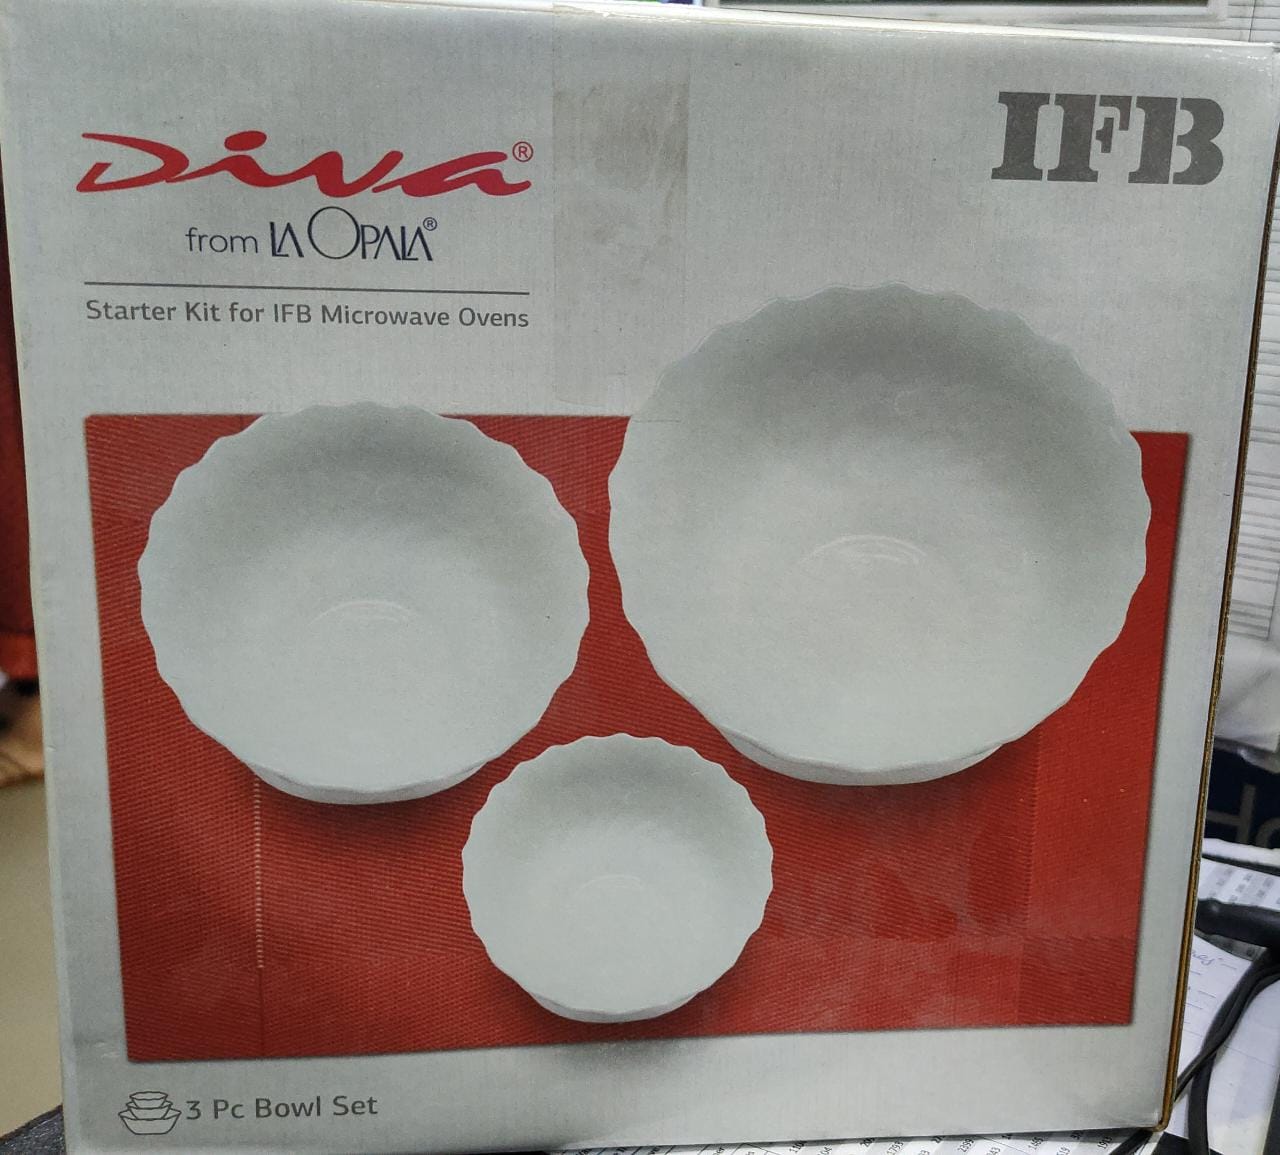 IFB Diva from Laopala Starter kit for microwave Ovens